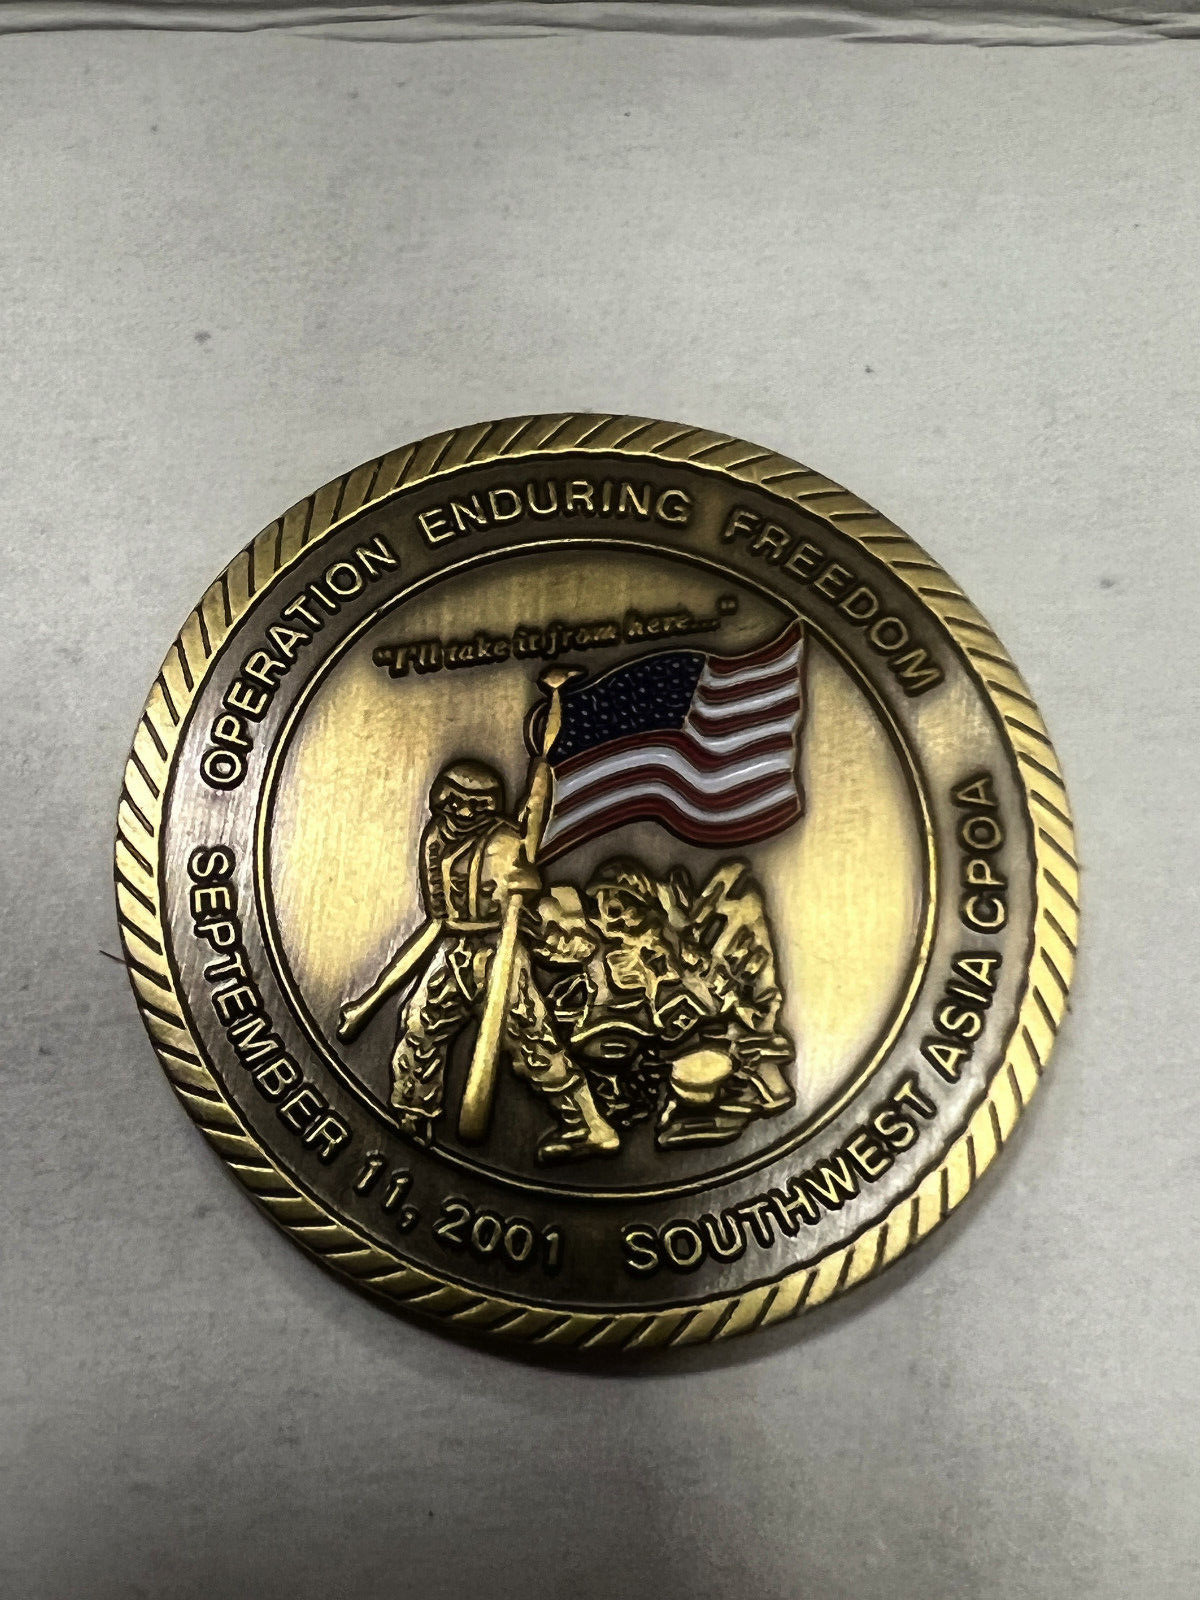 rare southwest asia us navy cpoa operation enduring freedom challenge coin, coa